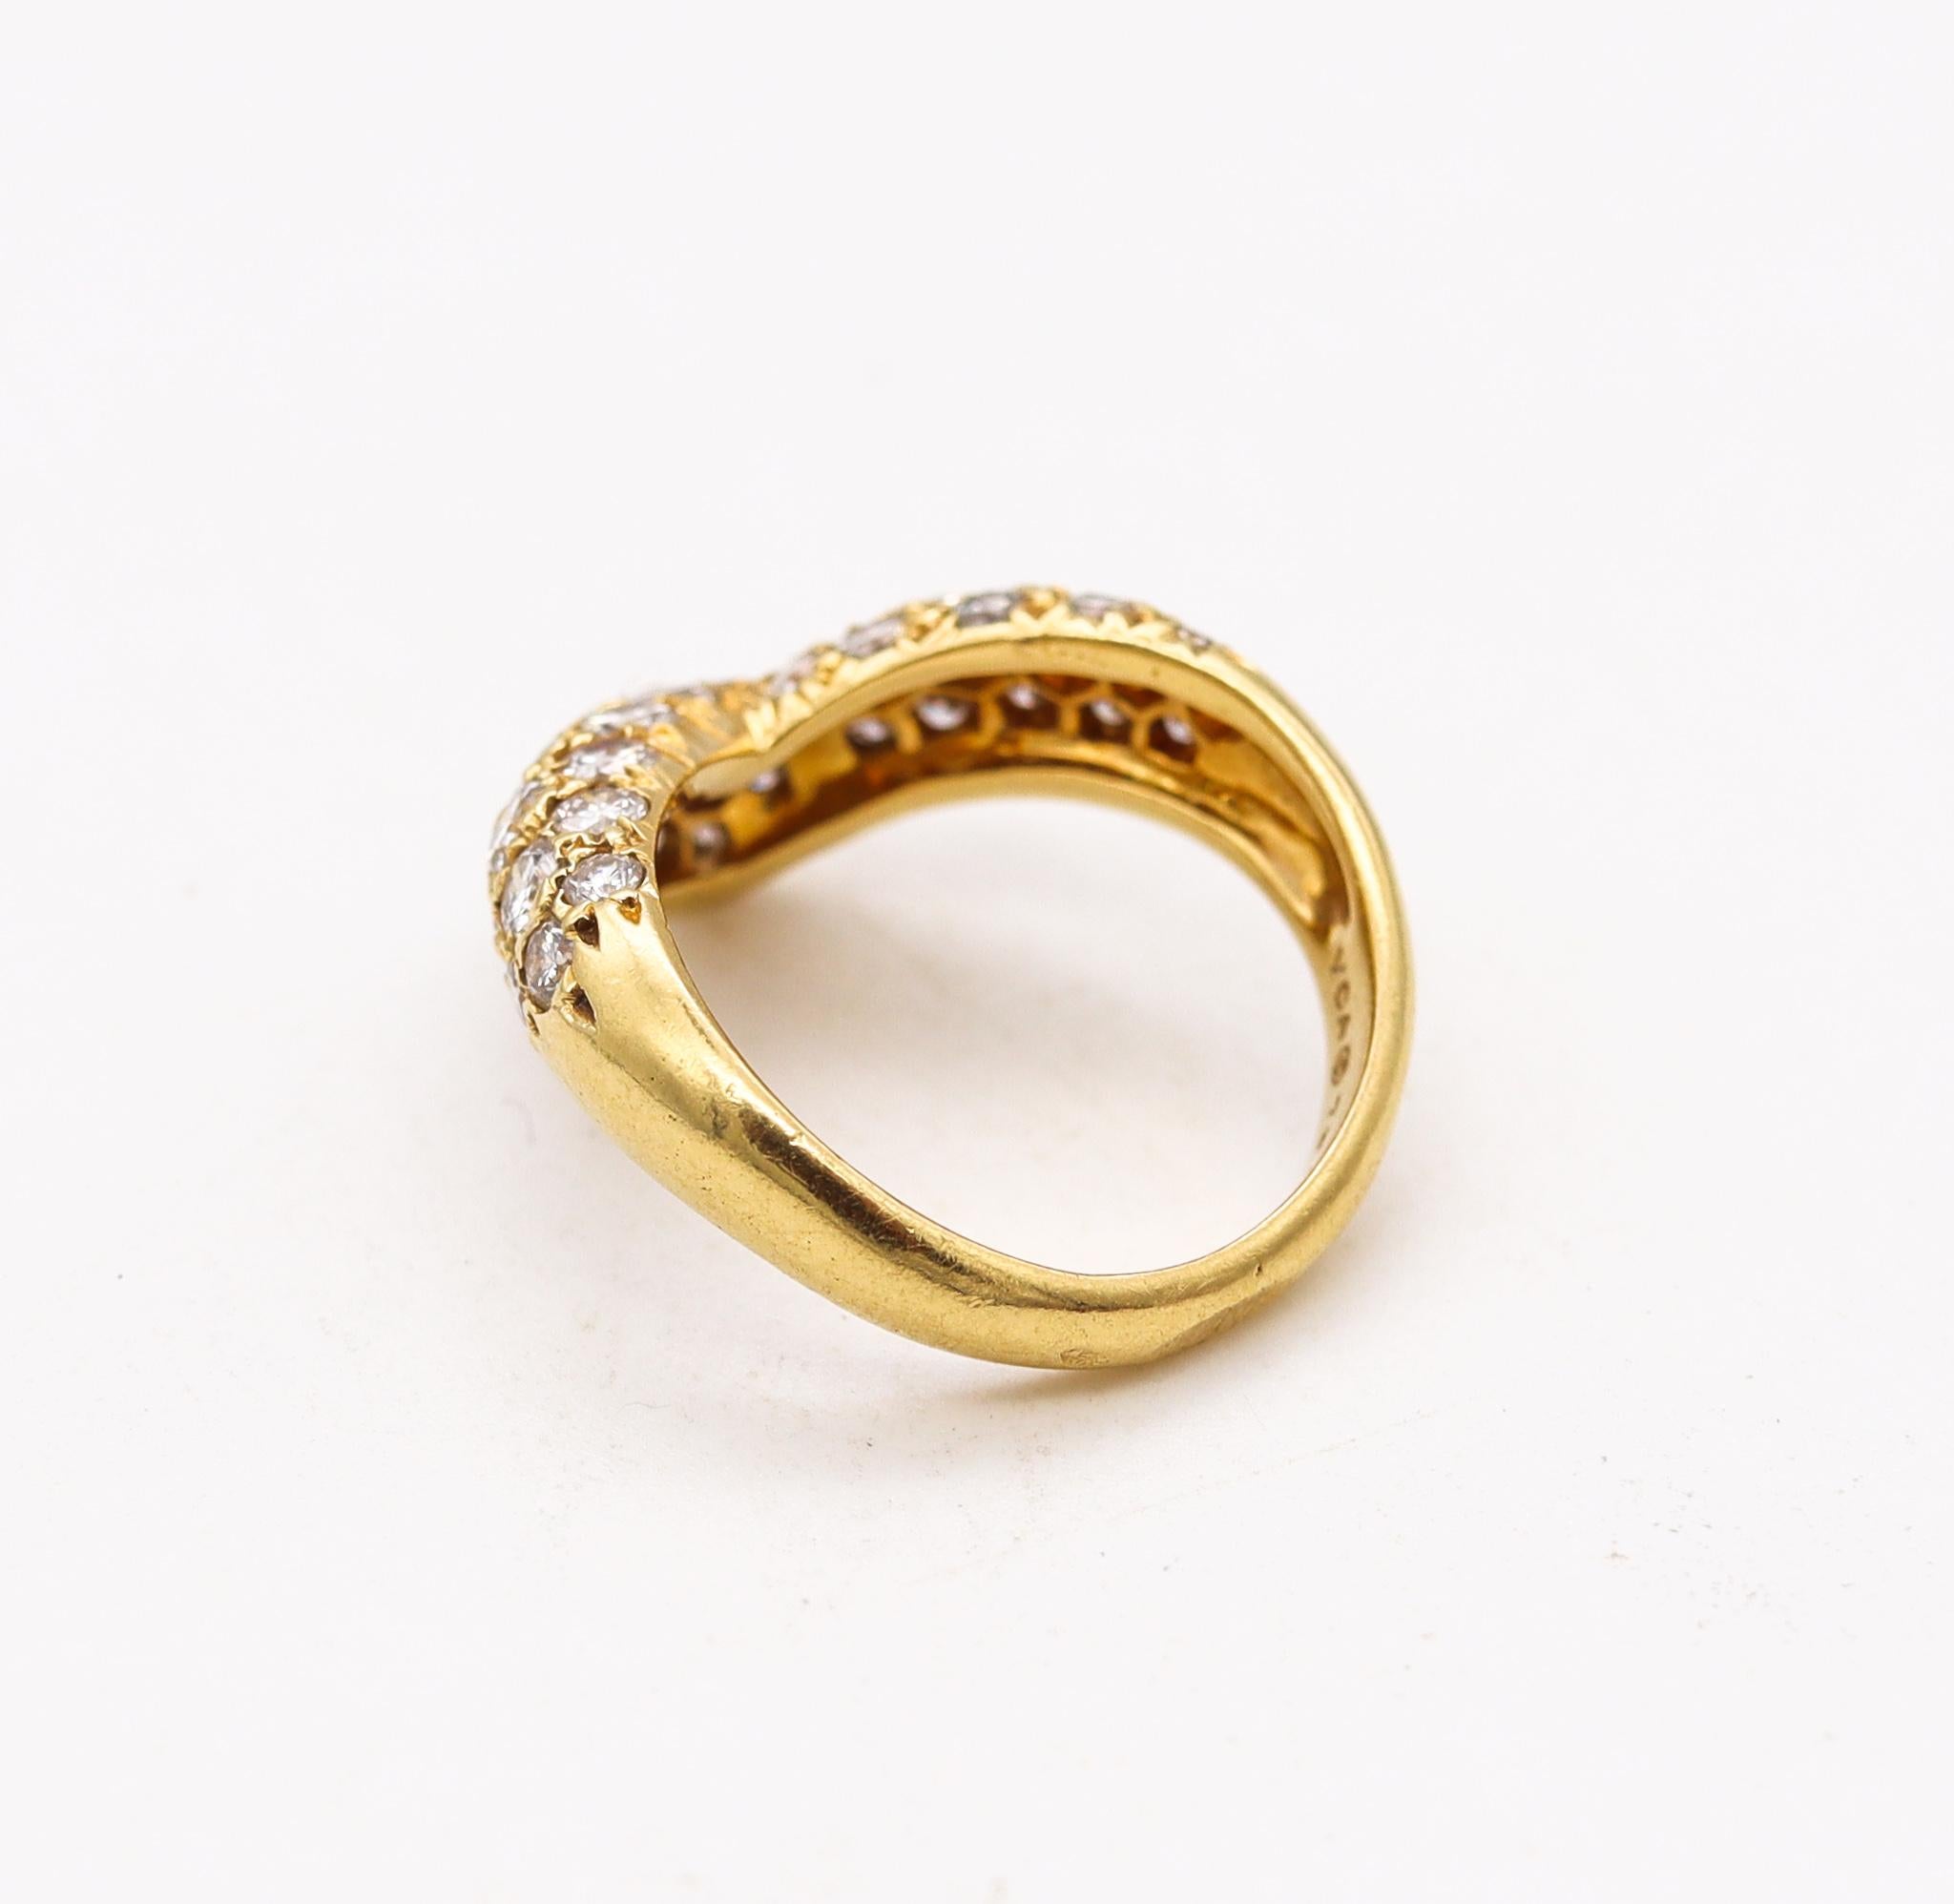 Brilliant Cut Van Cleef & Arpels 1976 Paris Ring in 18Kt Yellow Gold with 1.06 Cts Diamonds